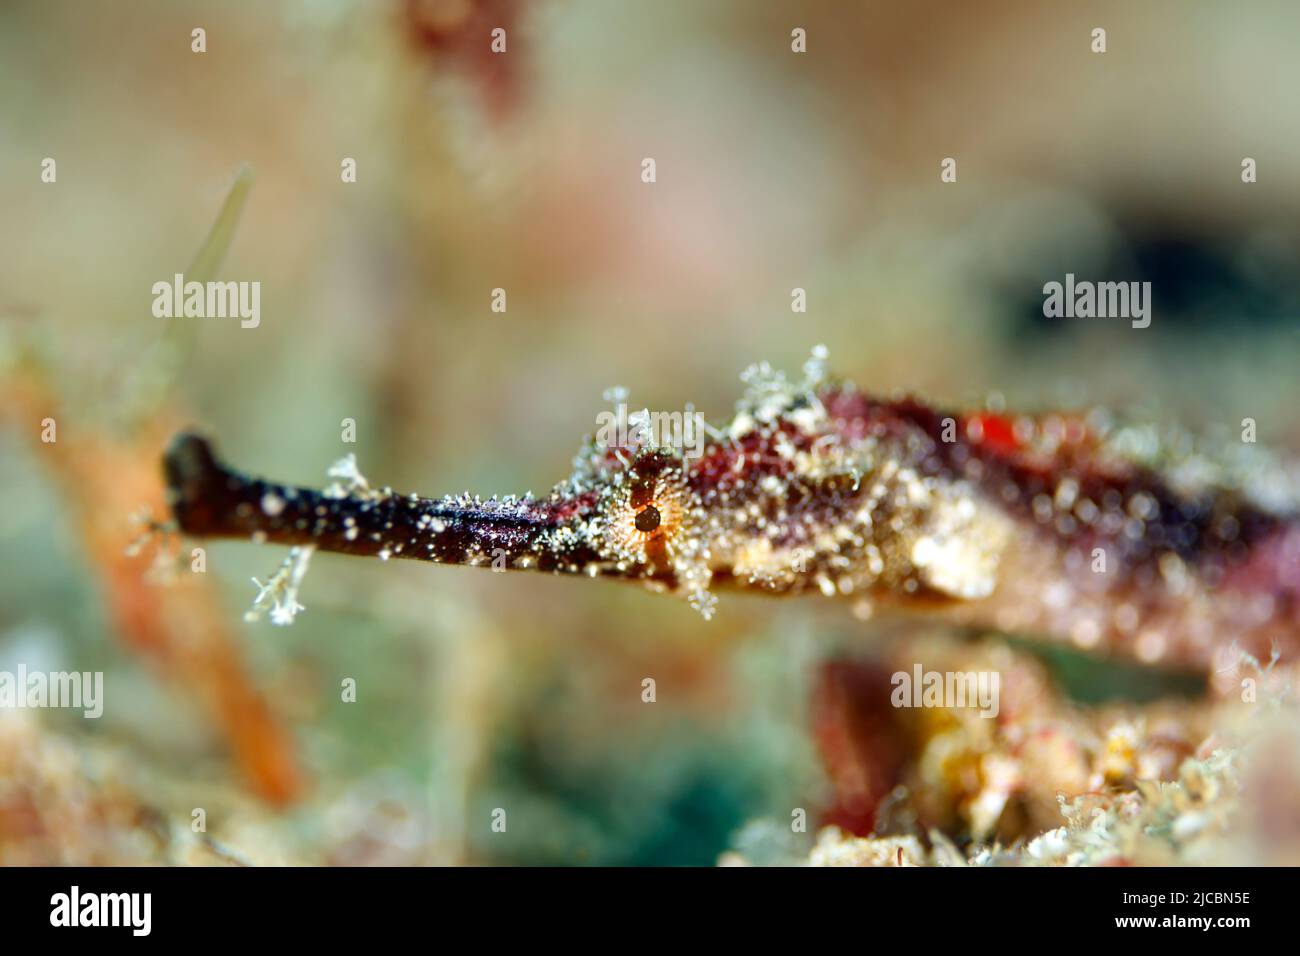 Close-up of a Pipefish. Triton Bay, West Papua, Indonesia Stock Photo